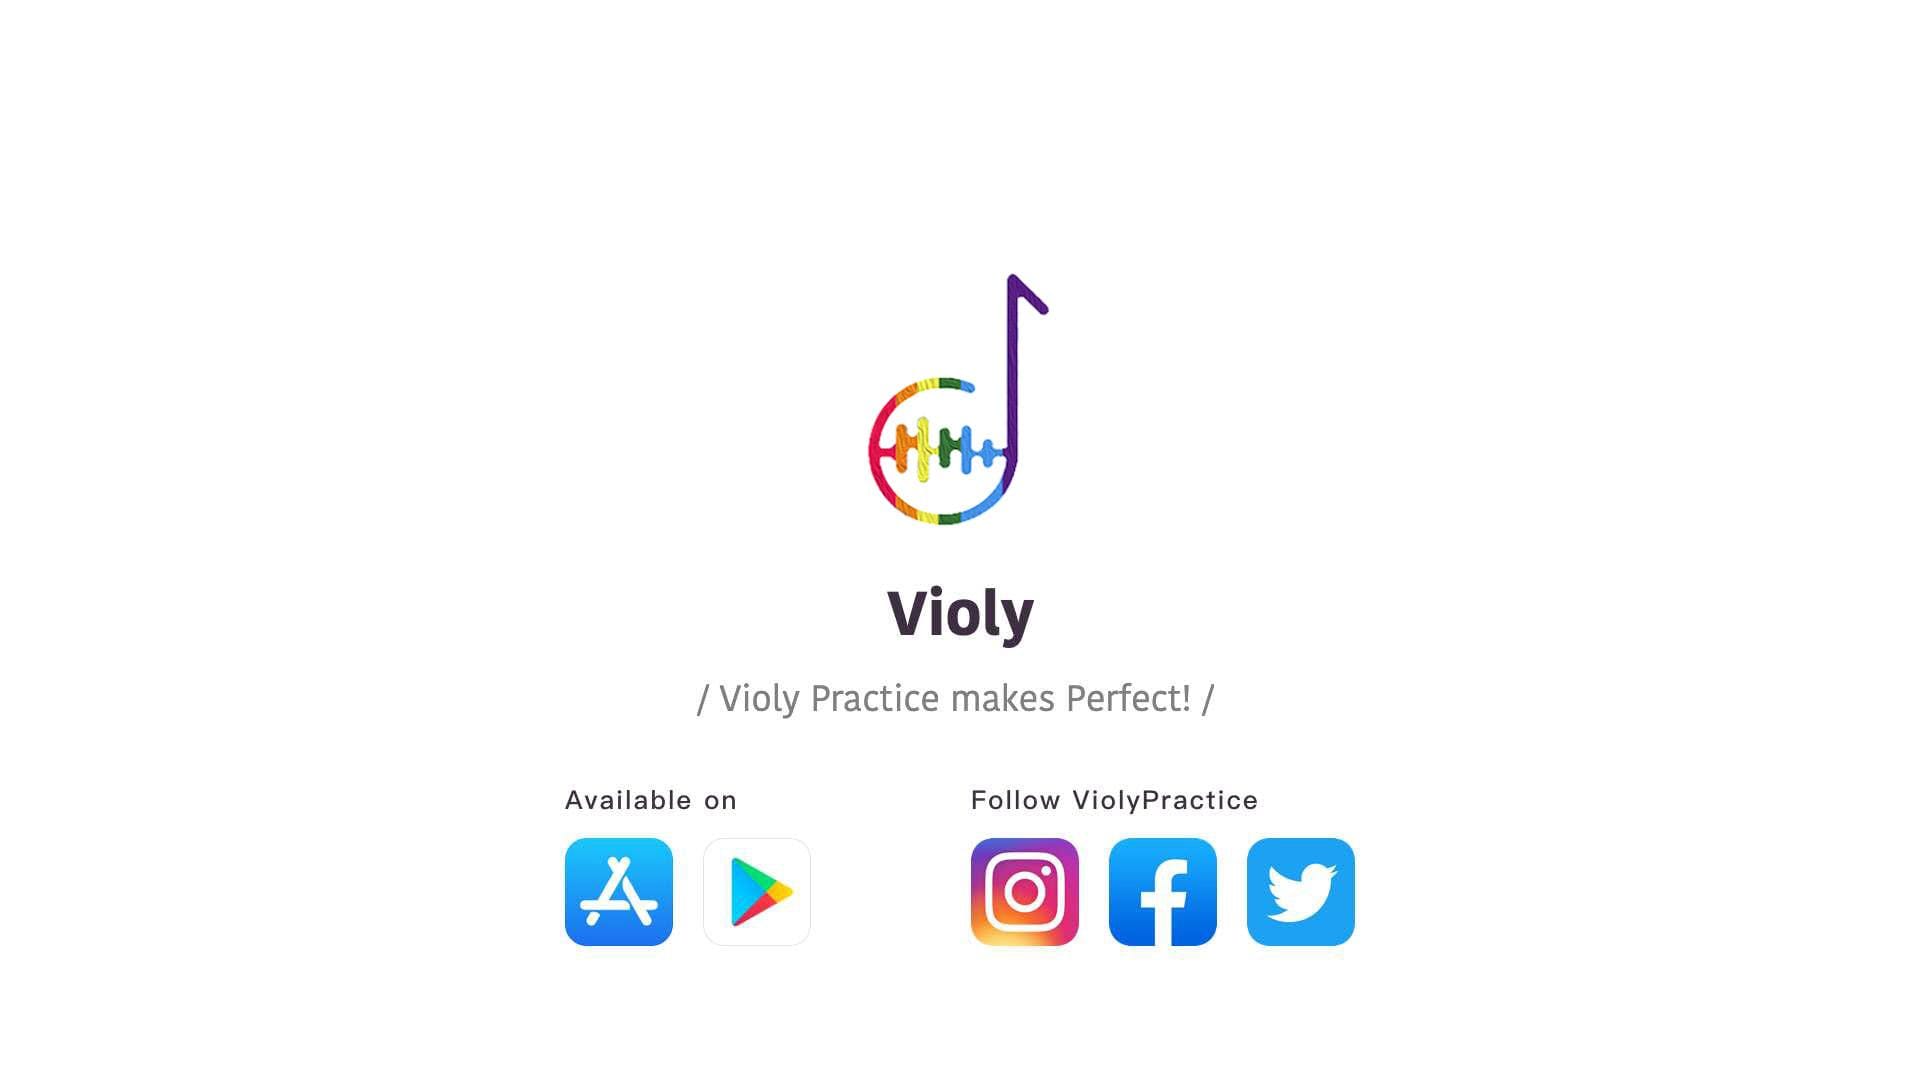 ViolyPractice makes Perfect!!